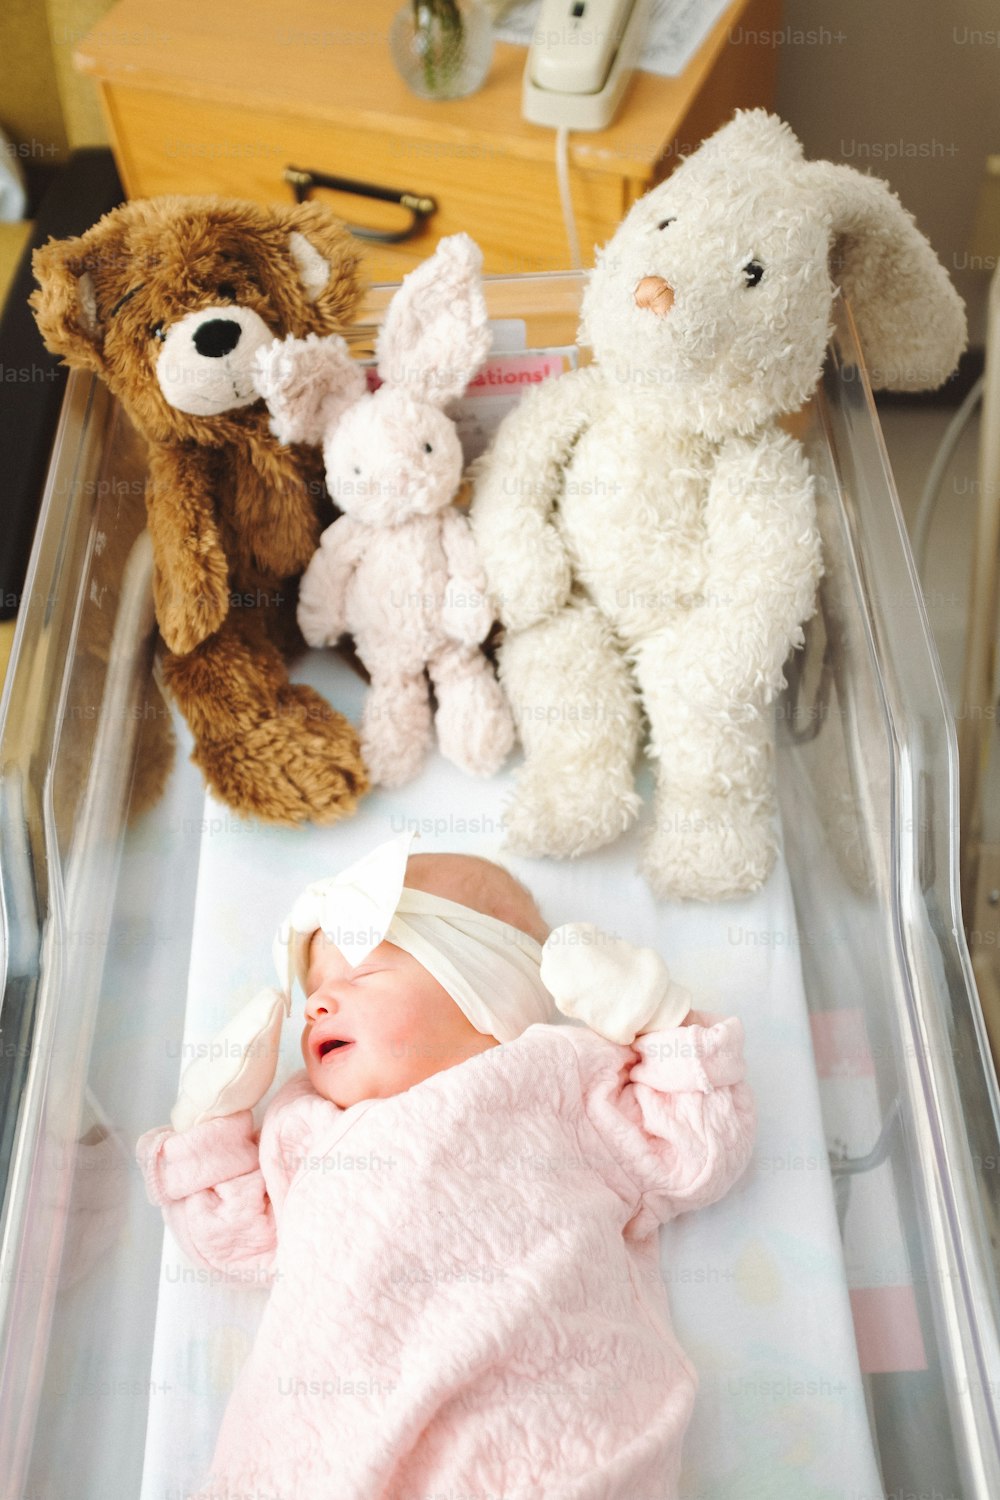 a baby in a crib with stuffed animals